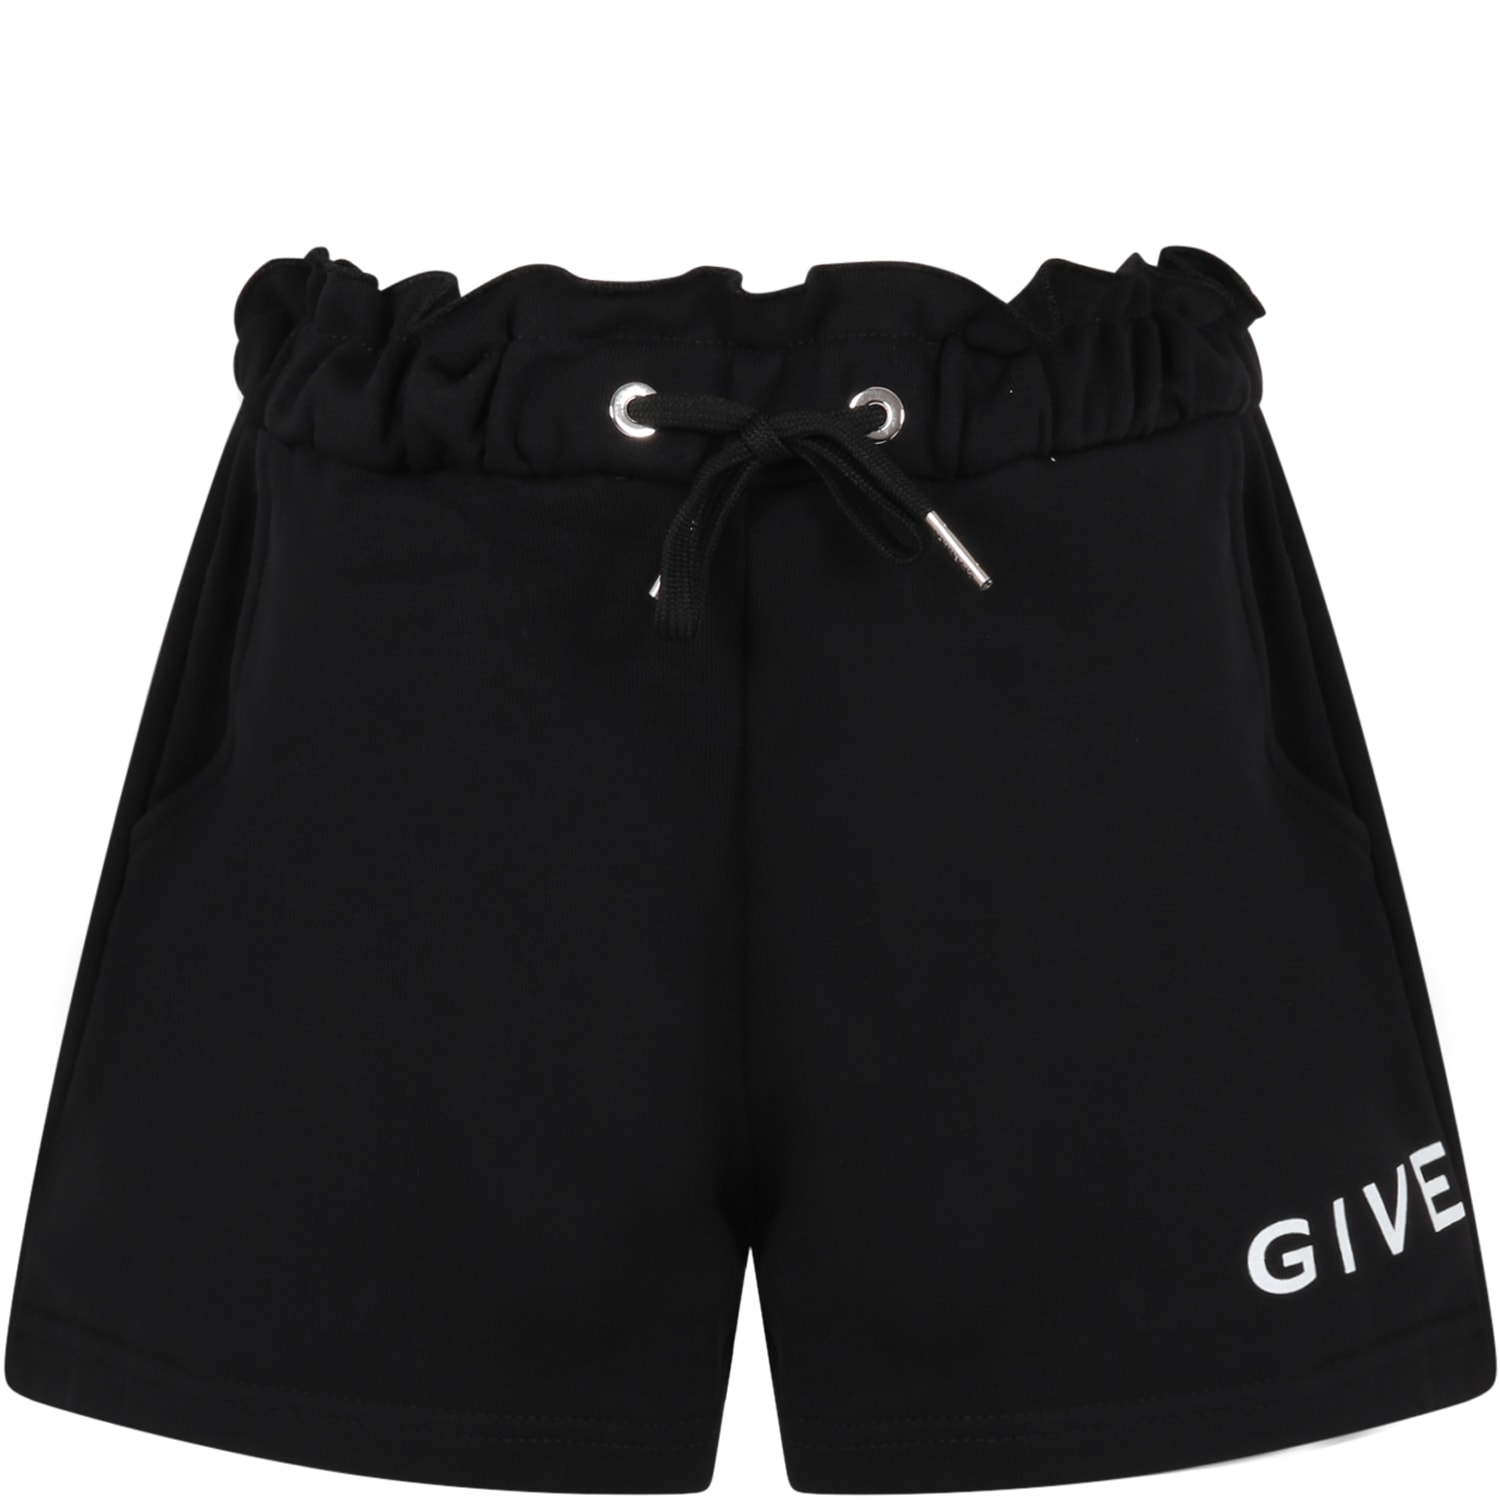 GIVENCHY BLACK SHORTS FOR GIRL WITH WHITE LOGO